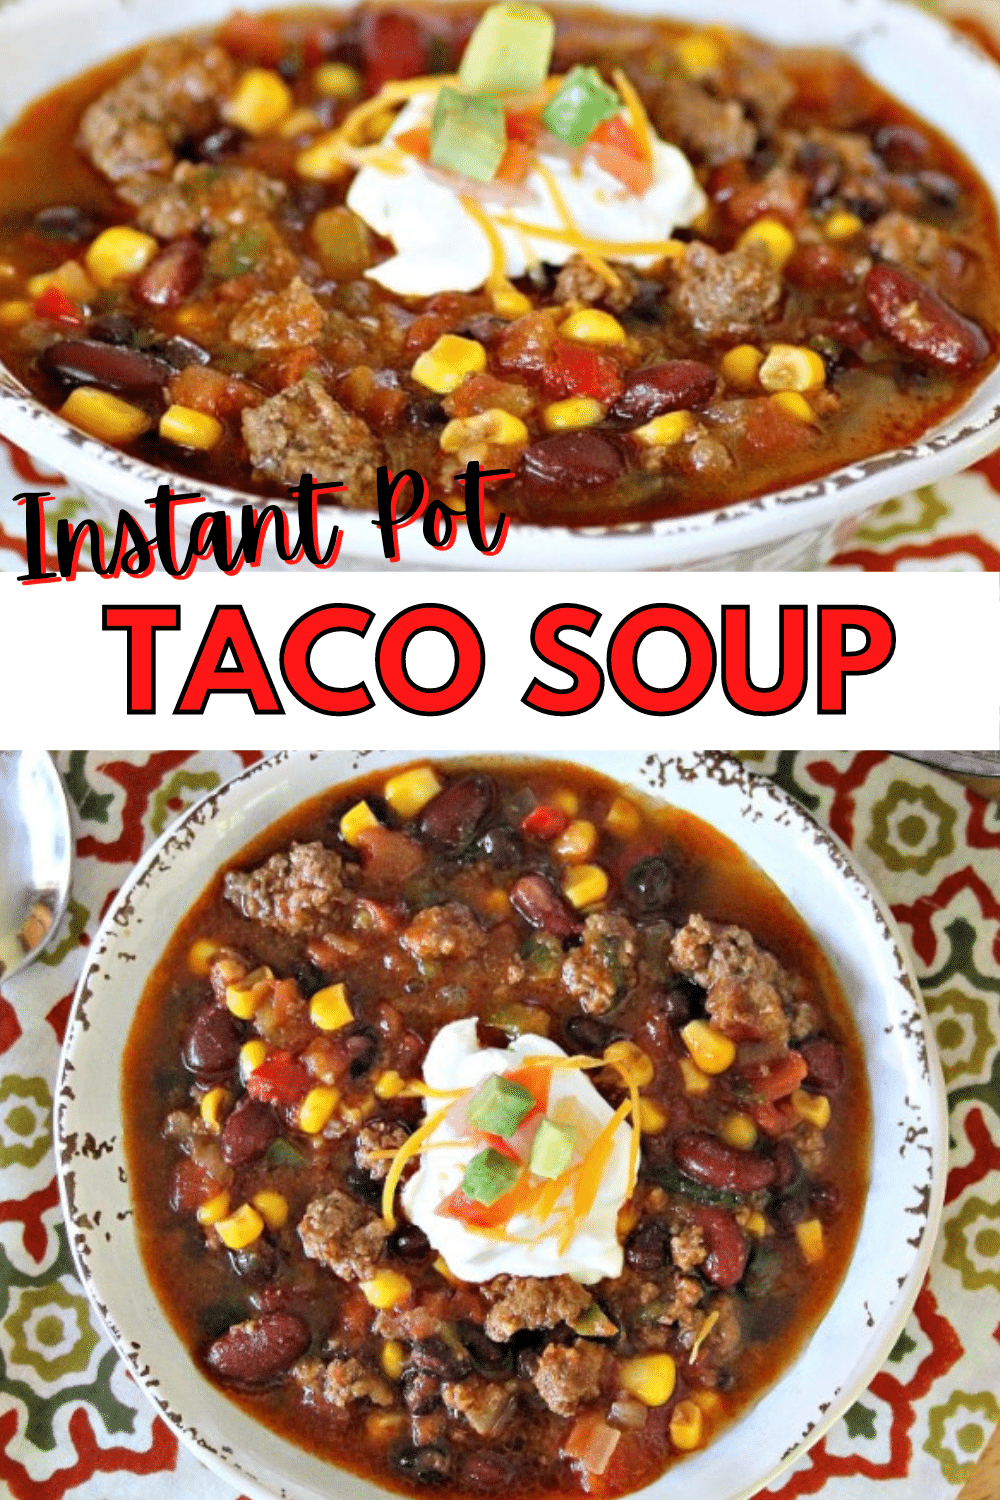 Instant Pot Taco Soup is one of the yummiest and easiest dinners ever! All the delicious taste of tacos in the form of a hot, satisfying bowl of soup! #souprecipes #tacos #instantpot #pressurecooker via @wondermomwannab